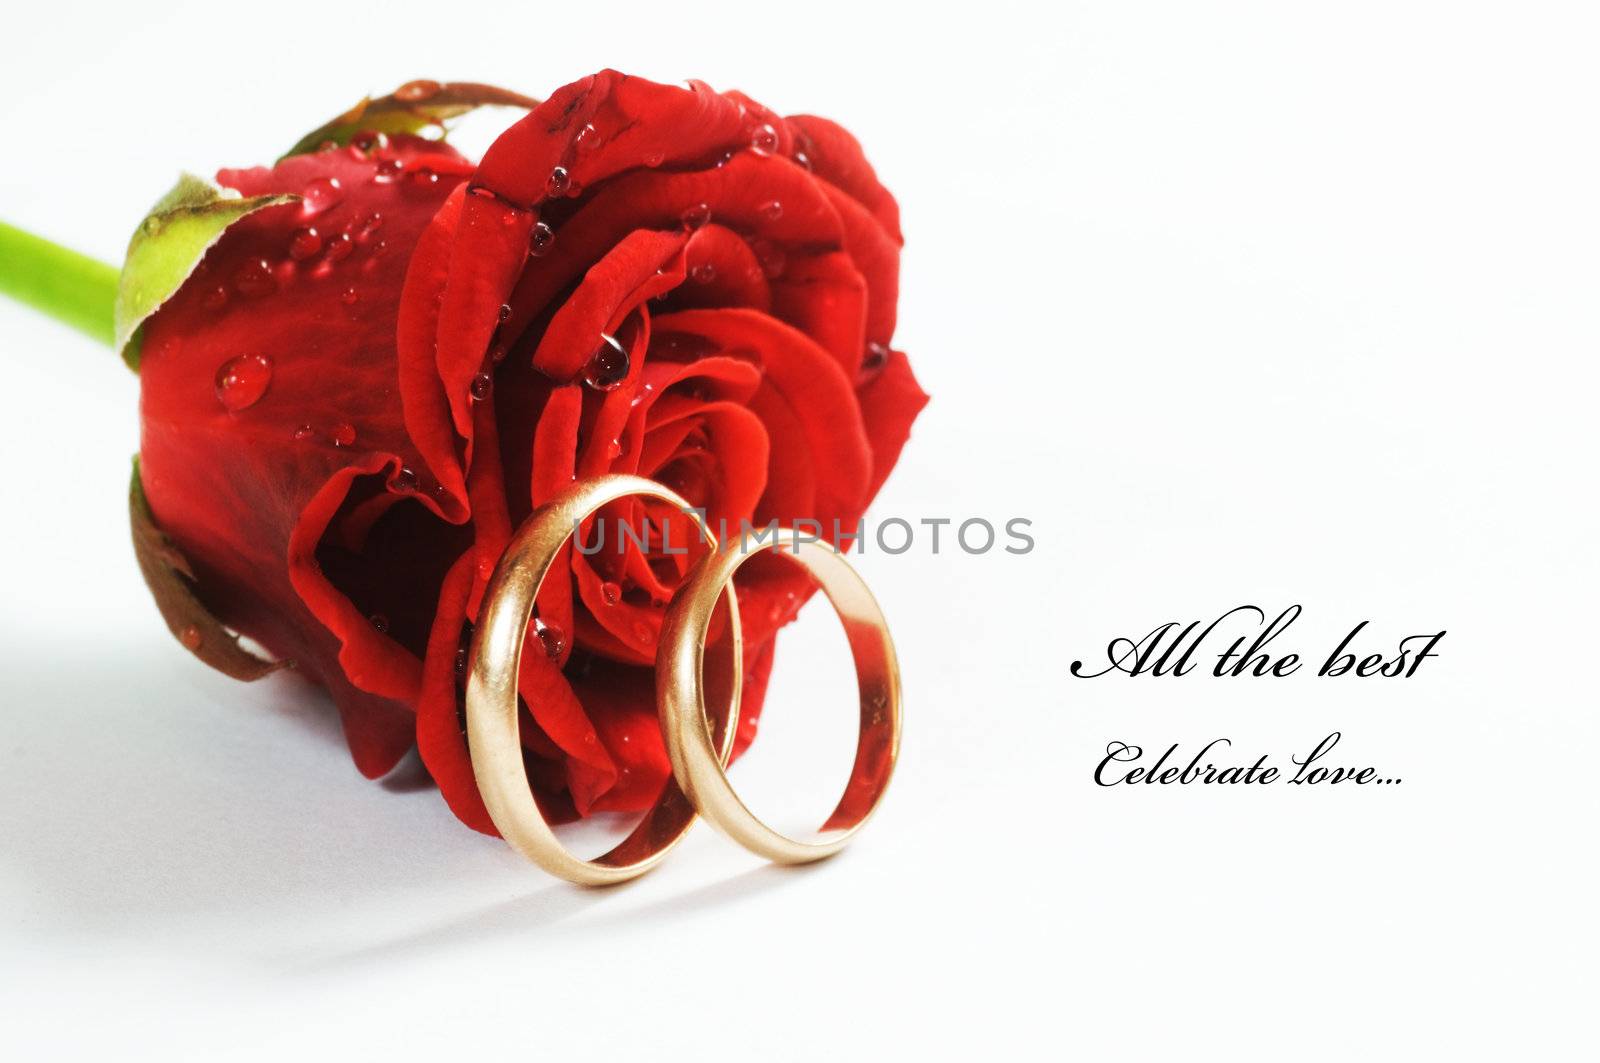 Red rose and wedding ring by photocreo